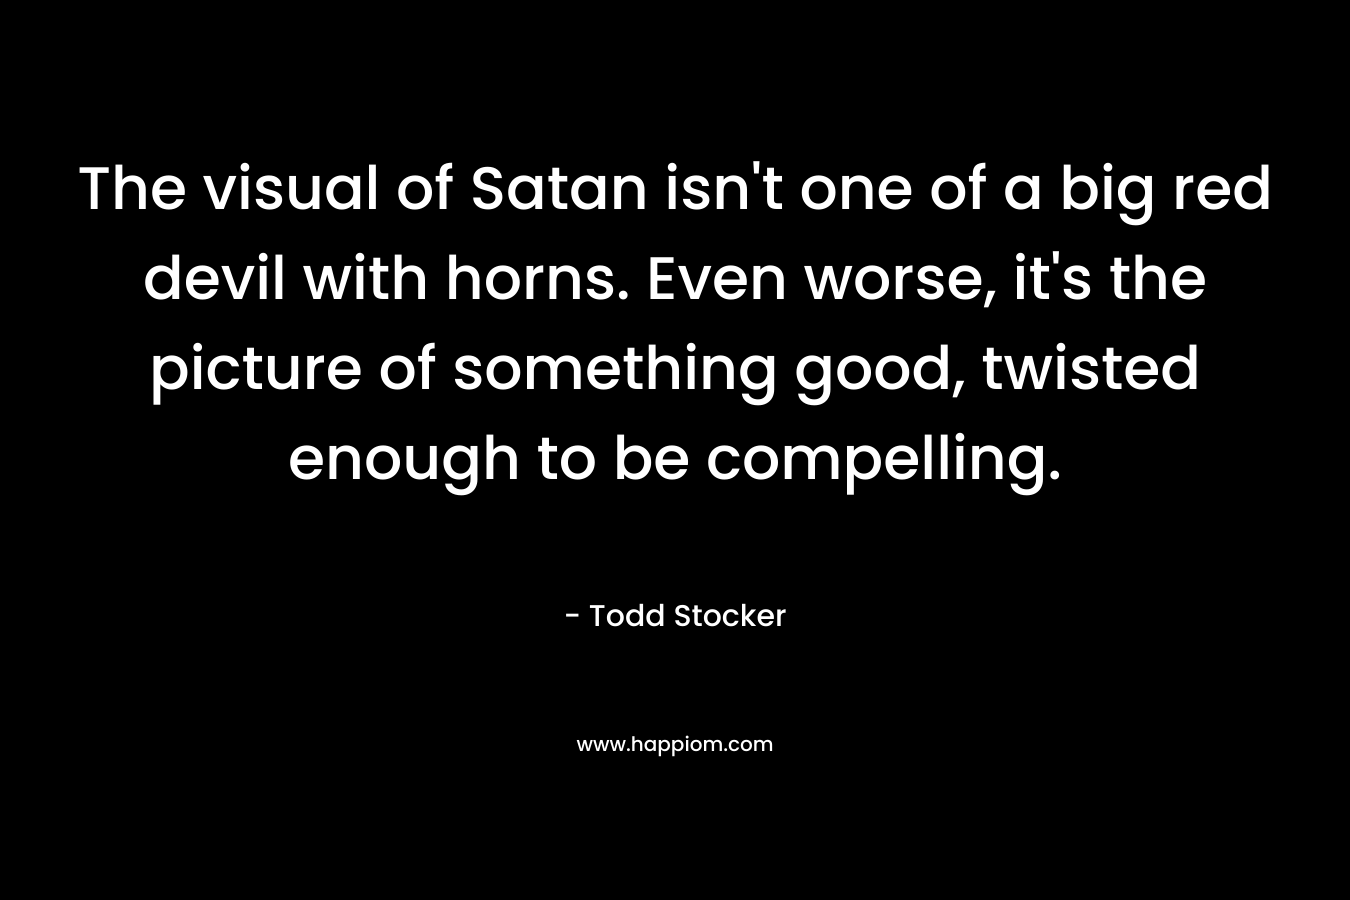 The visual of Satan isn't one of a big red devil with horns. Even worse, it's the picture of something good, twisted enough to be compelling.